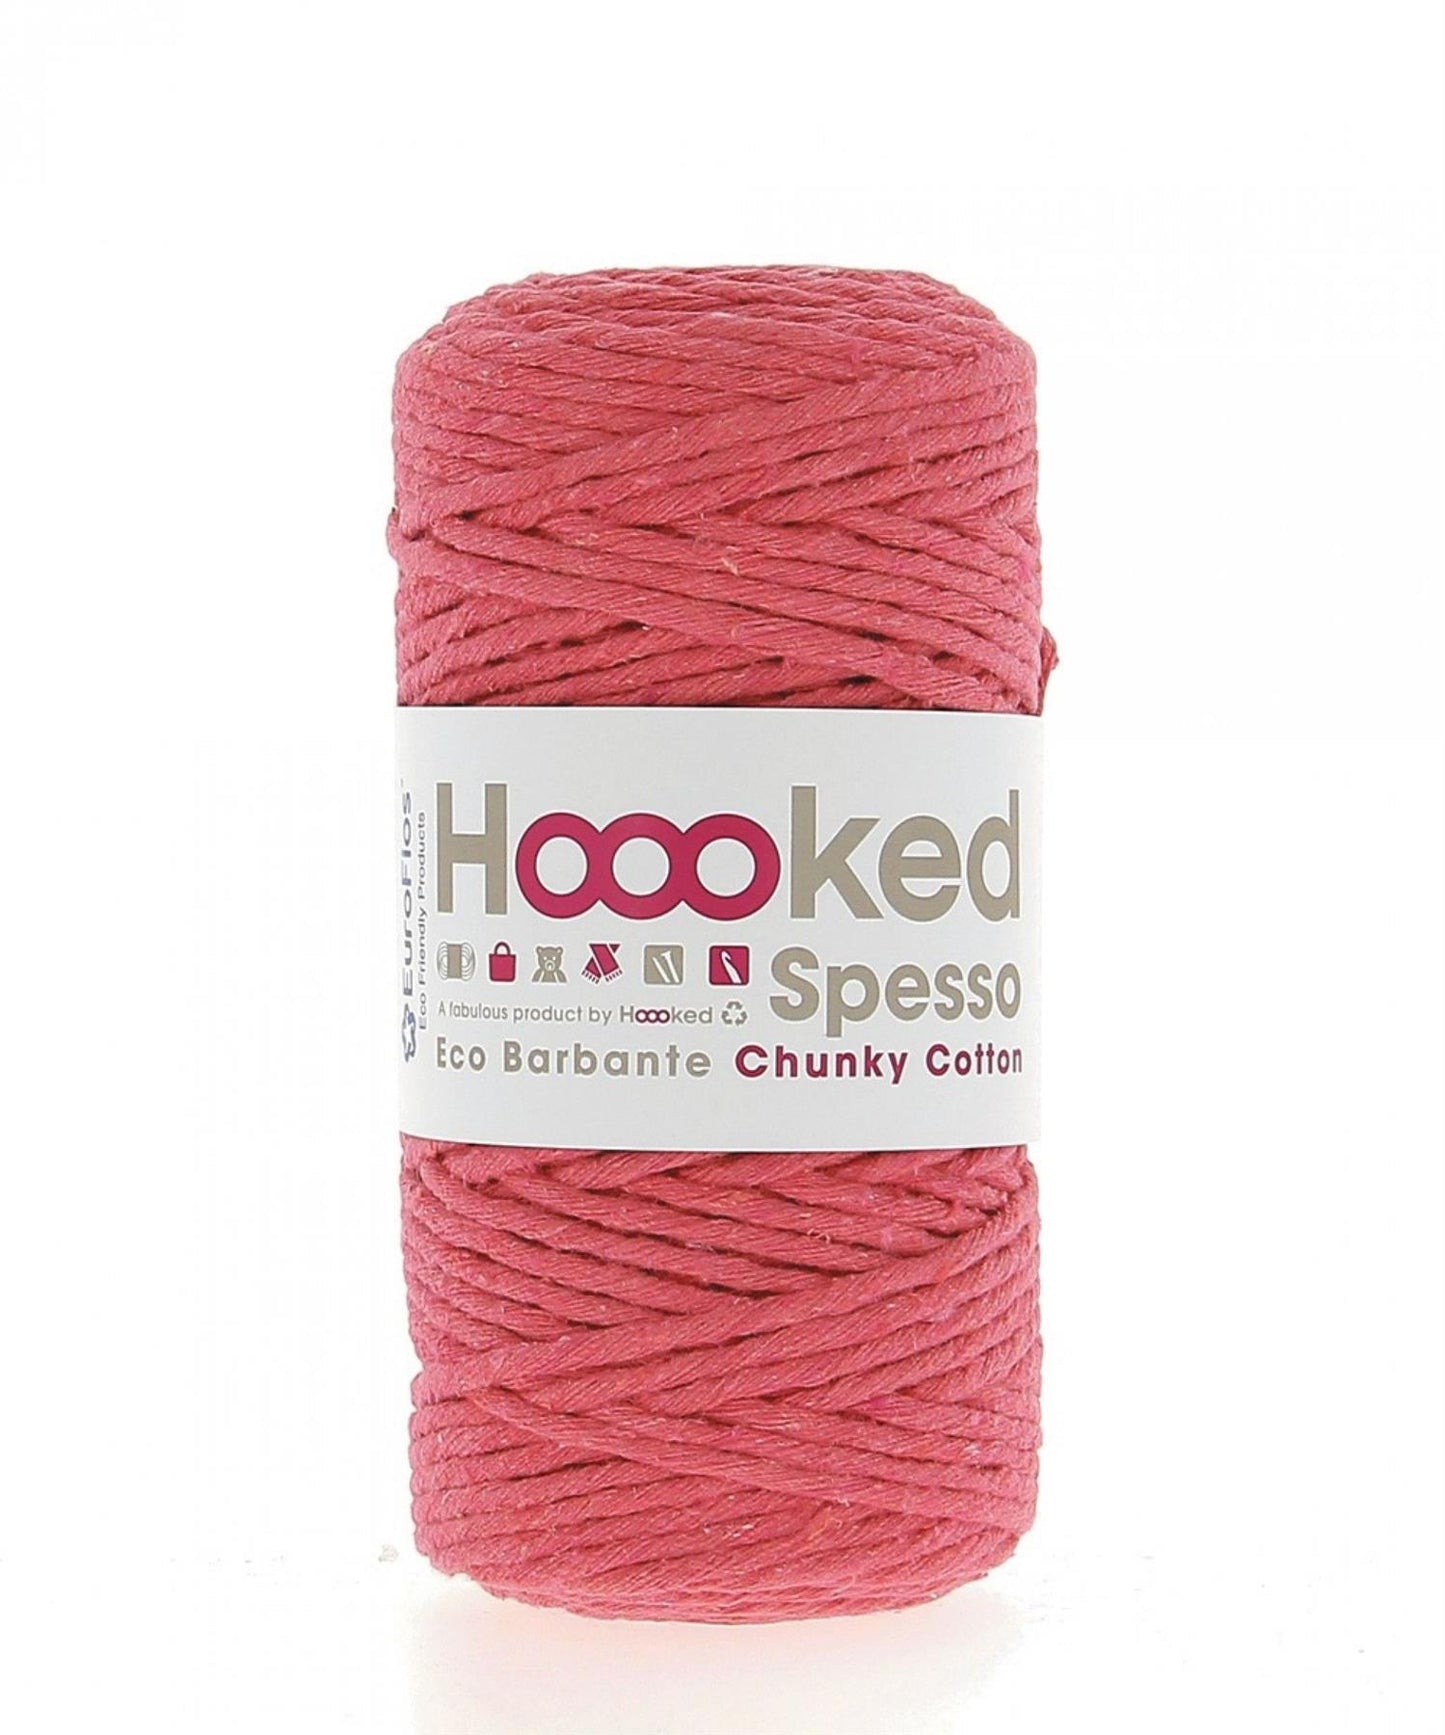 [Hoooked] S1070 Spesso Chunky Coral Red Cotton Yarn - 127M, 500g